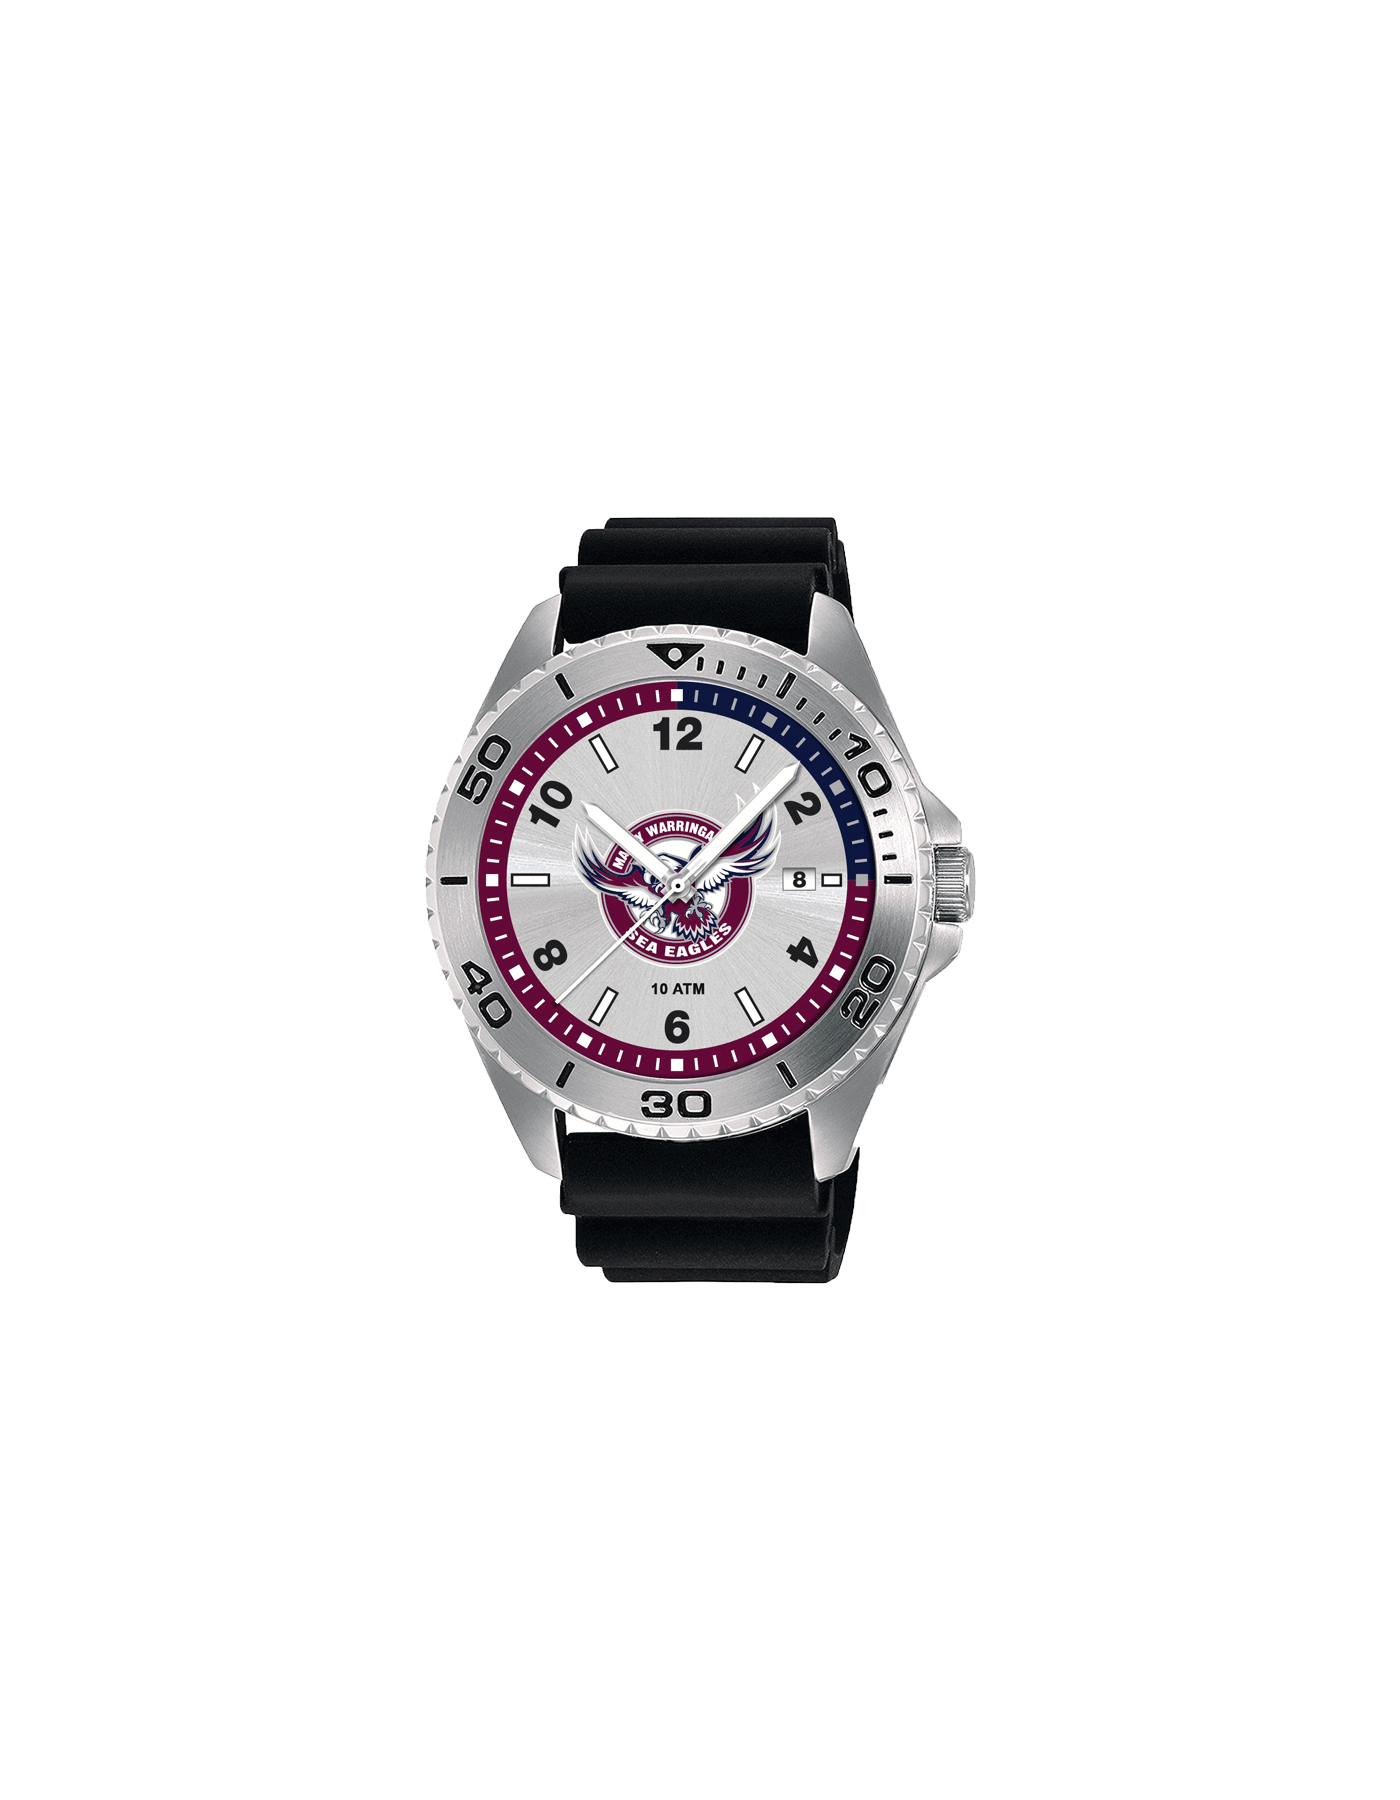 MANLY SEA EAGLES NRL TRY SERIES WATCH_MANLY SEA EAGLES_STUBBY CLUB